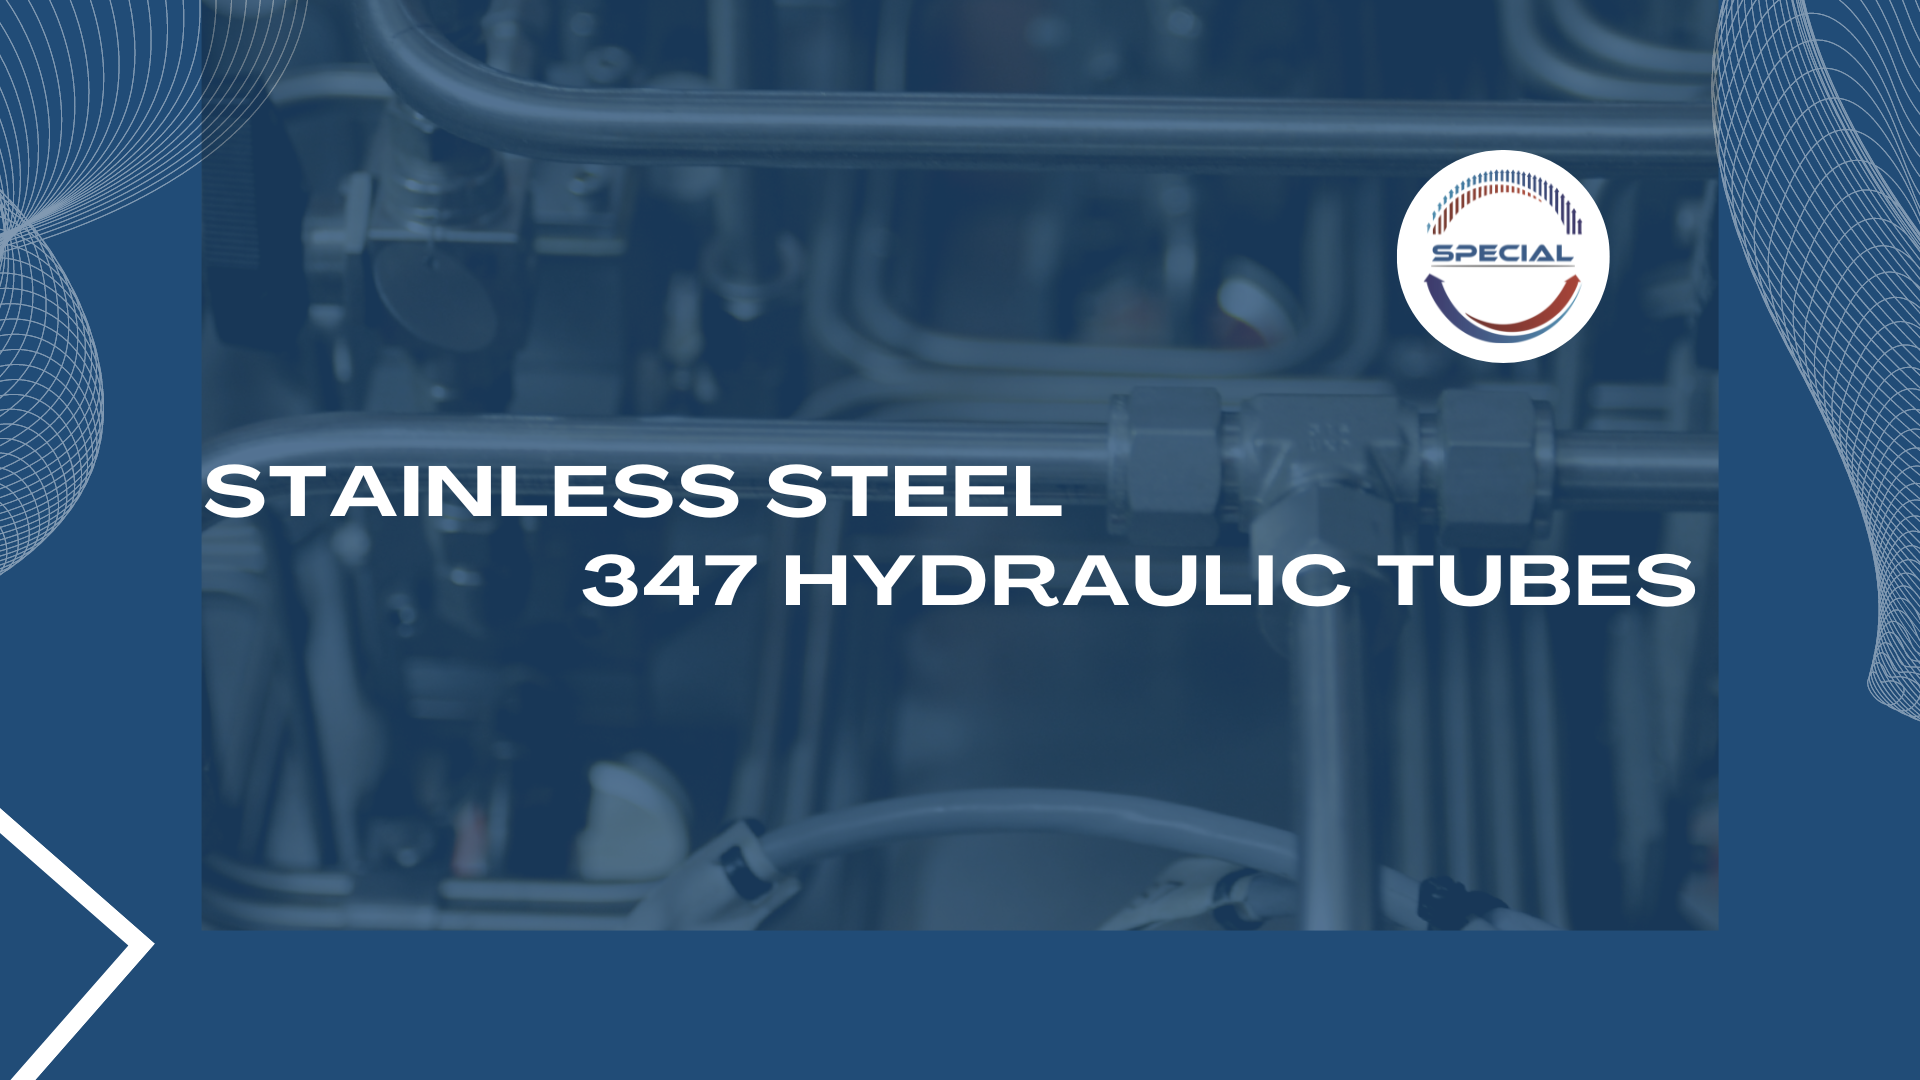 Stainless Steel 347 Hydraulic Tubes